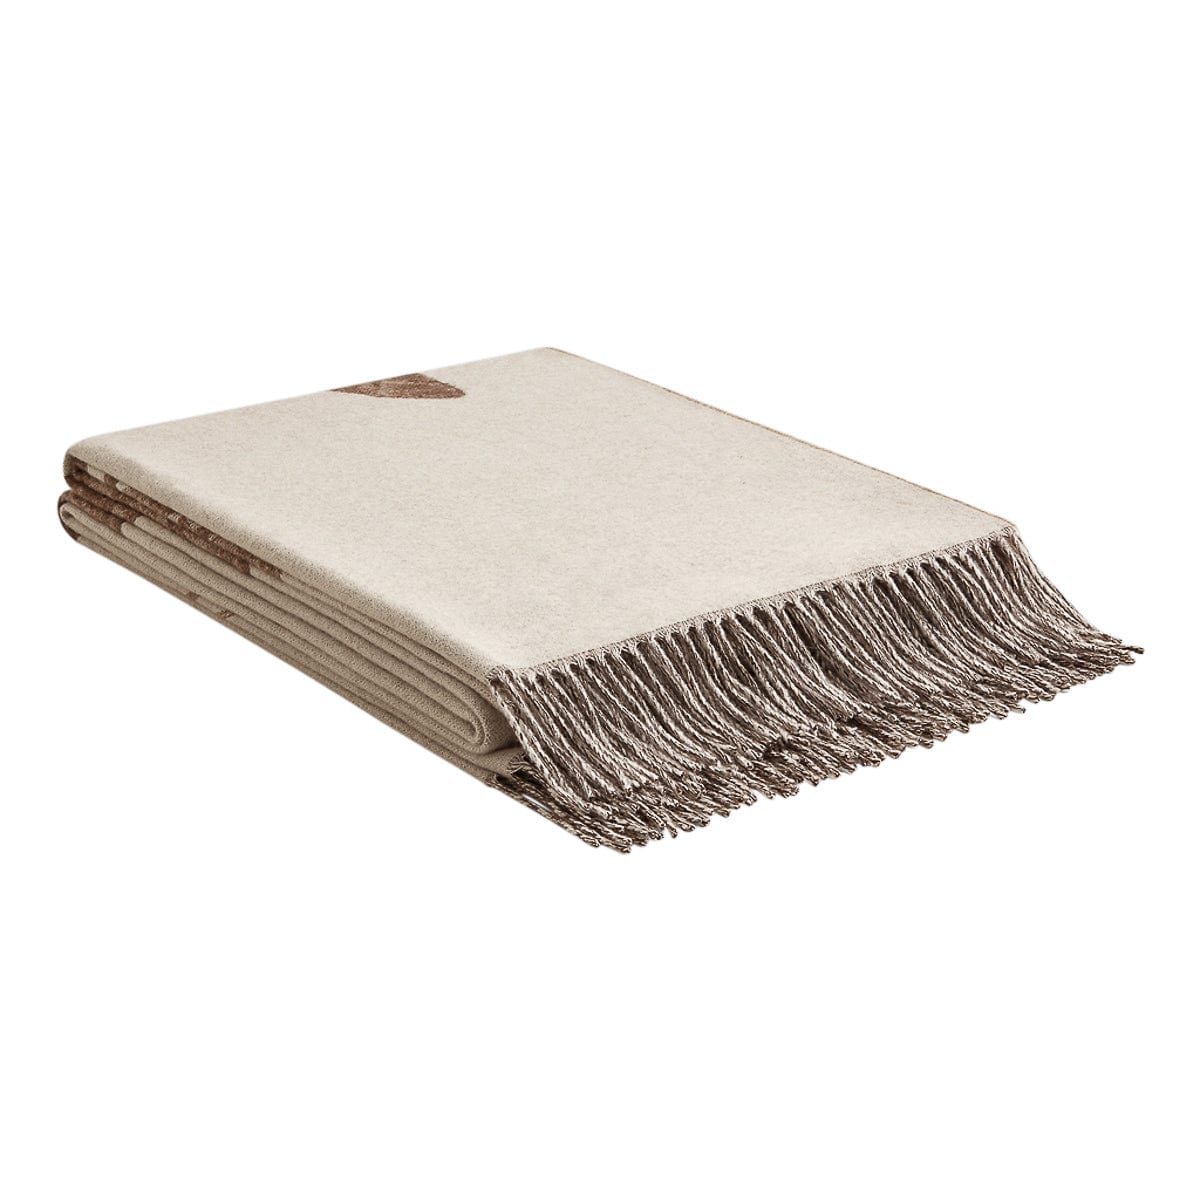 LV Charms Inspired Fashion Woven Throw with Fringe